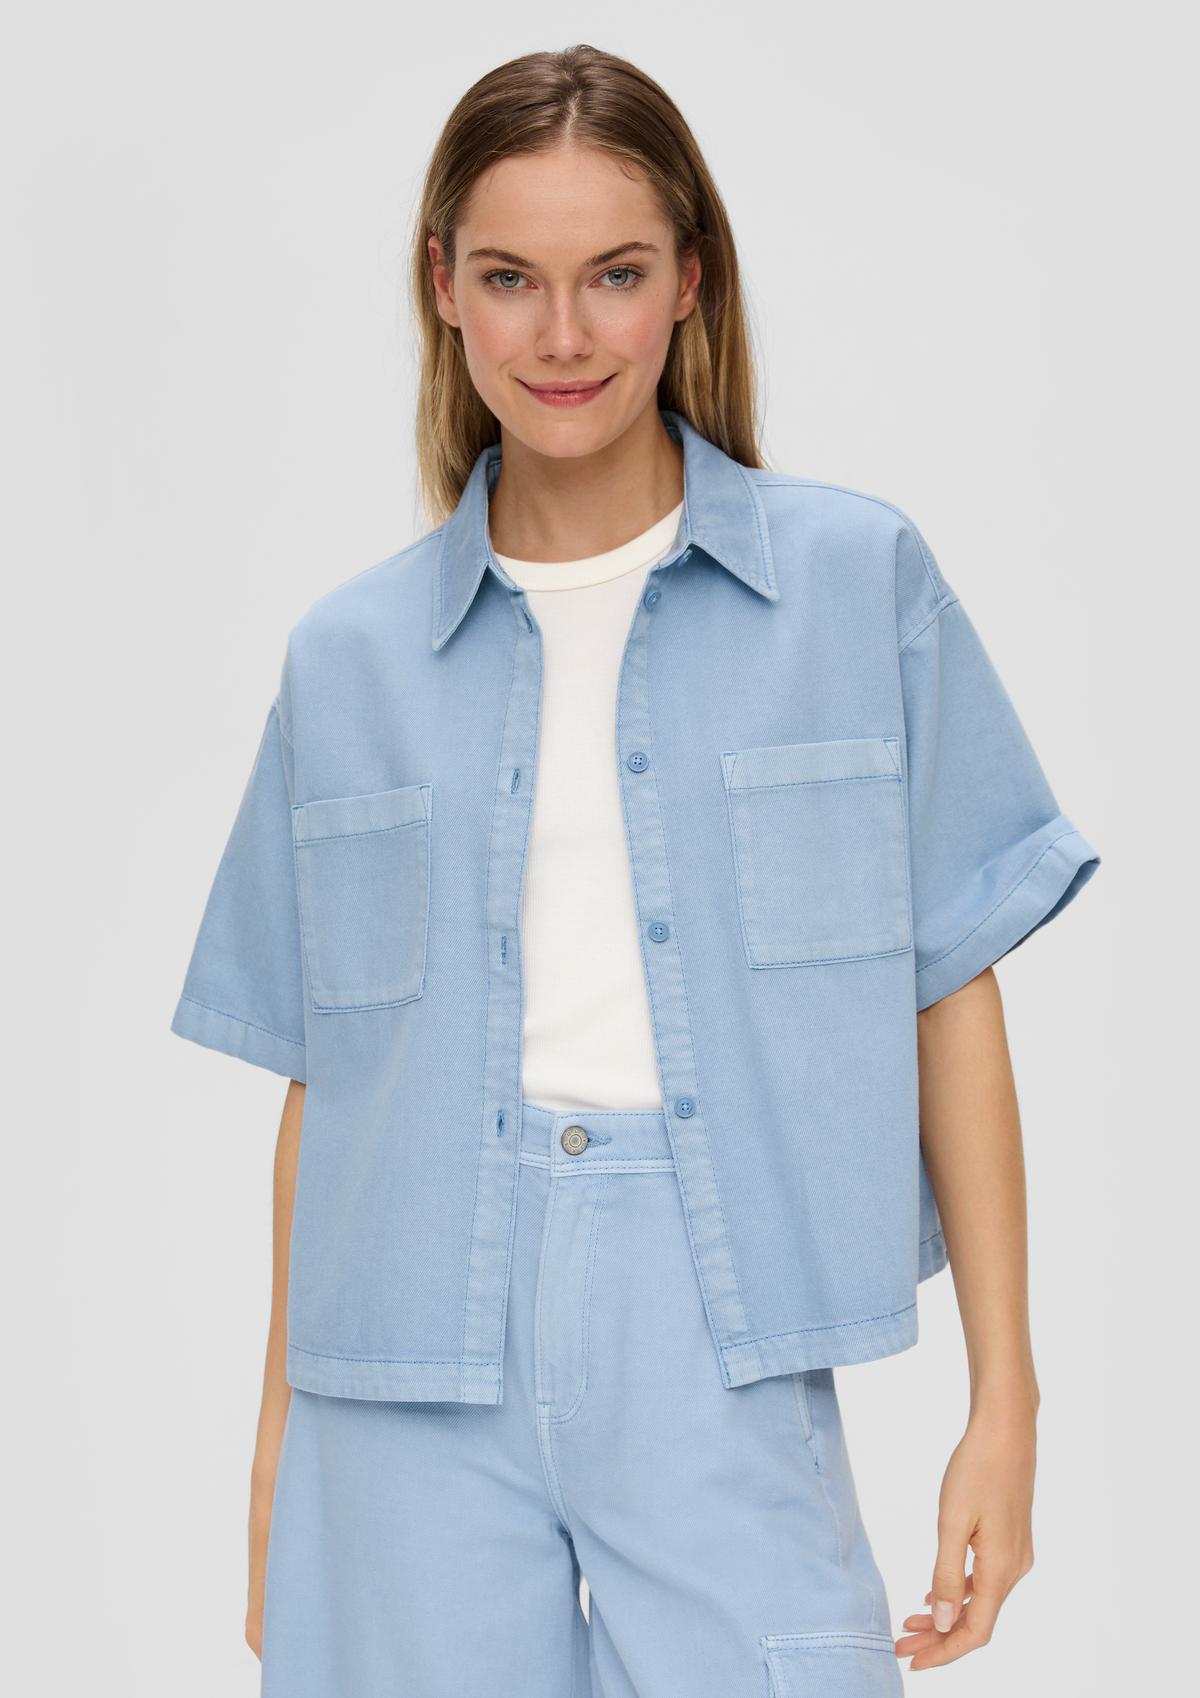 Cotton shirt blouse in a loose fit